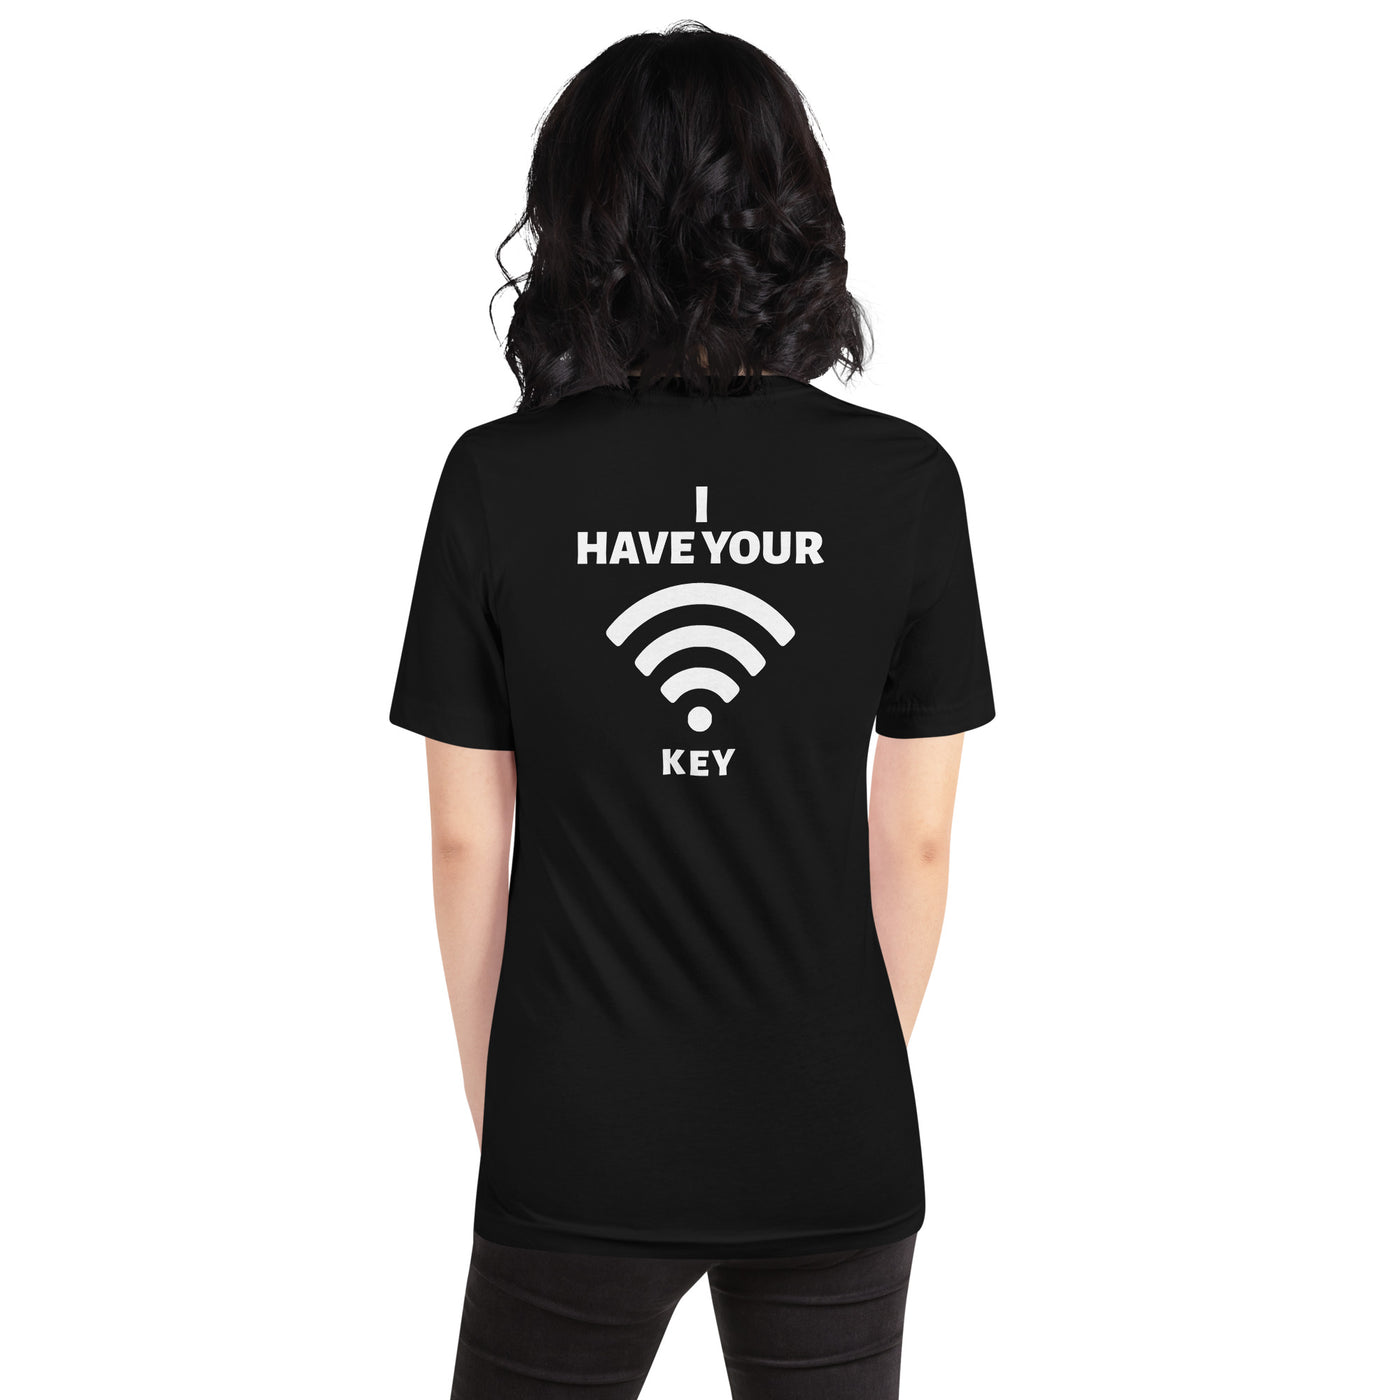 I have your Wi-Fi password - Unisex t-shirt ( Back Print )